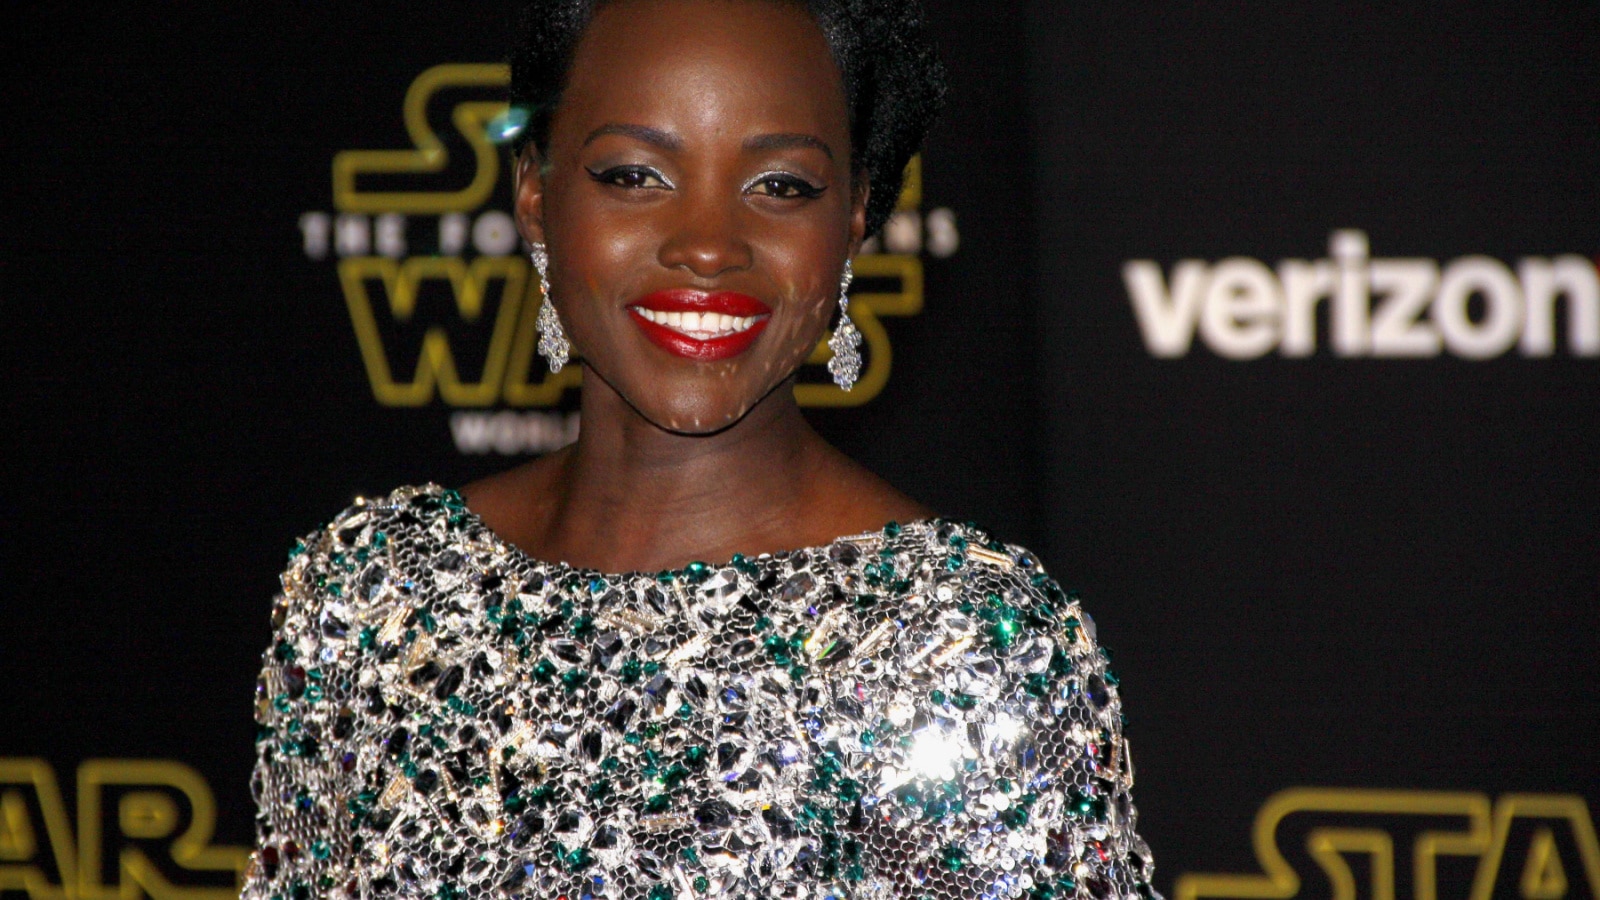 Lupita Nyong'o at the World premiere of 'Star Wars: The Force Awakens' held at the TCL Chinese Theatre in Hollywood, USA on December 14, 2015.